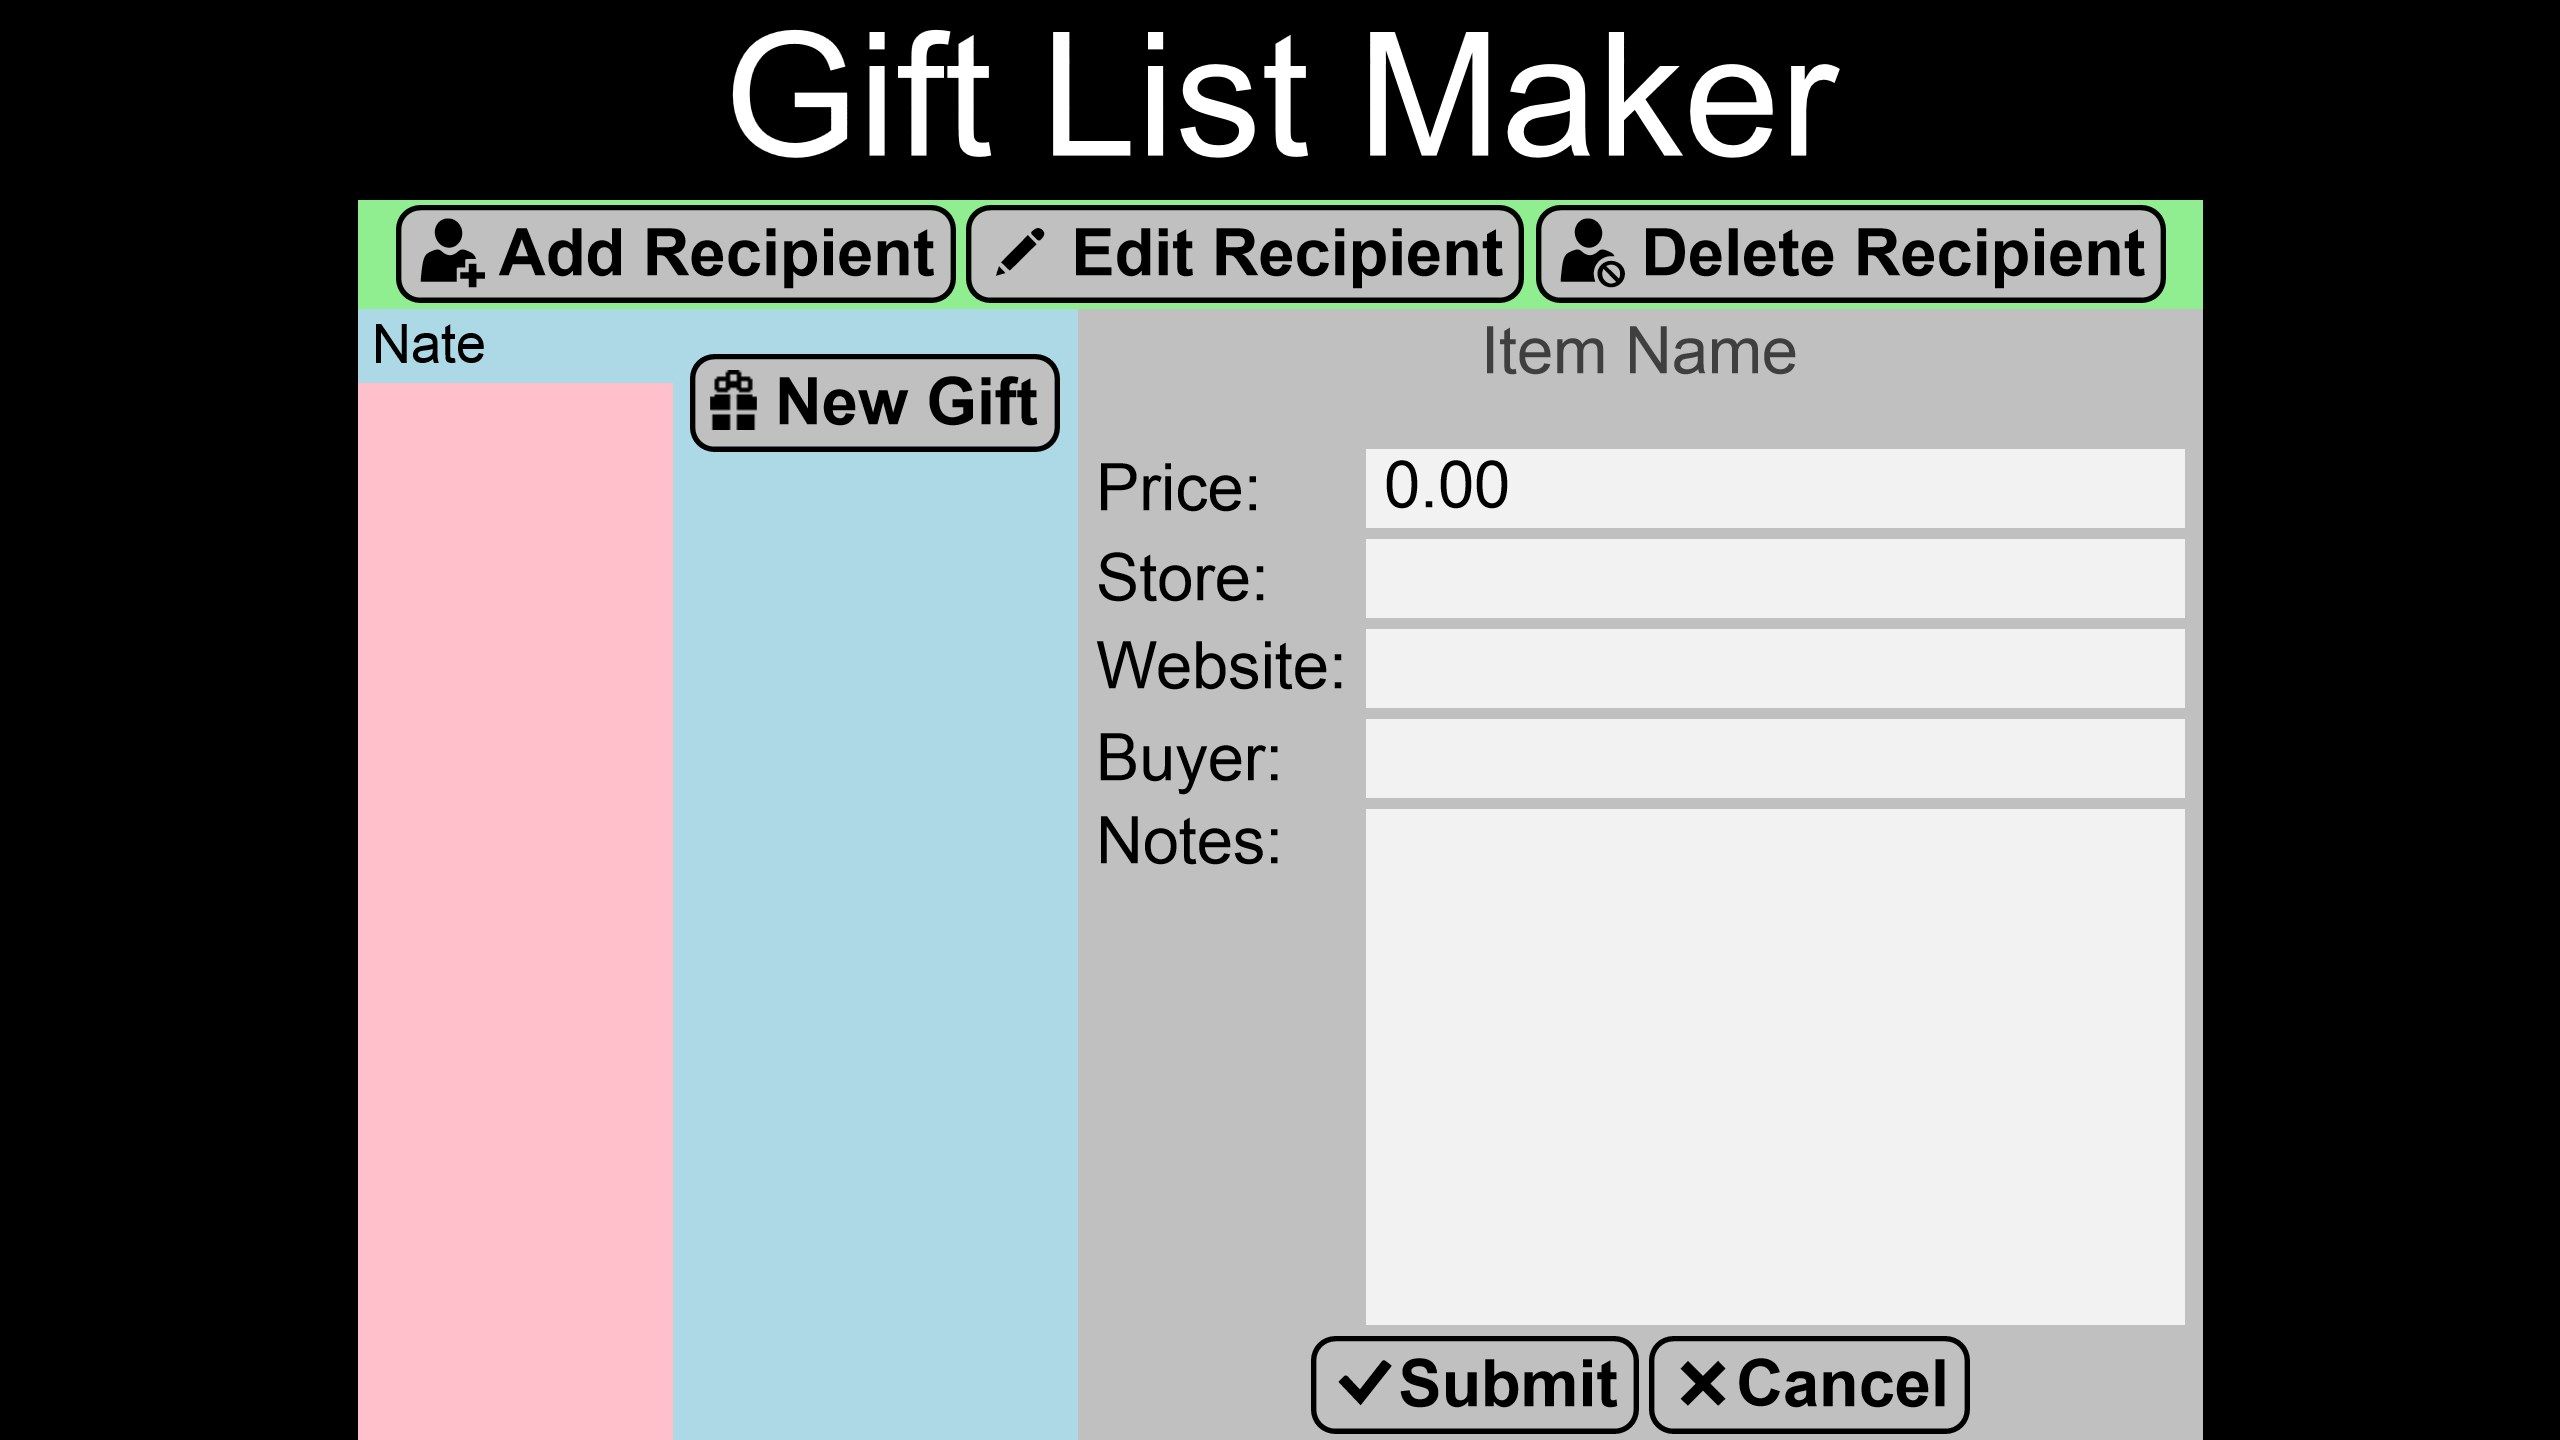 Gifts can be added using a very basic form